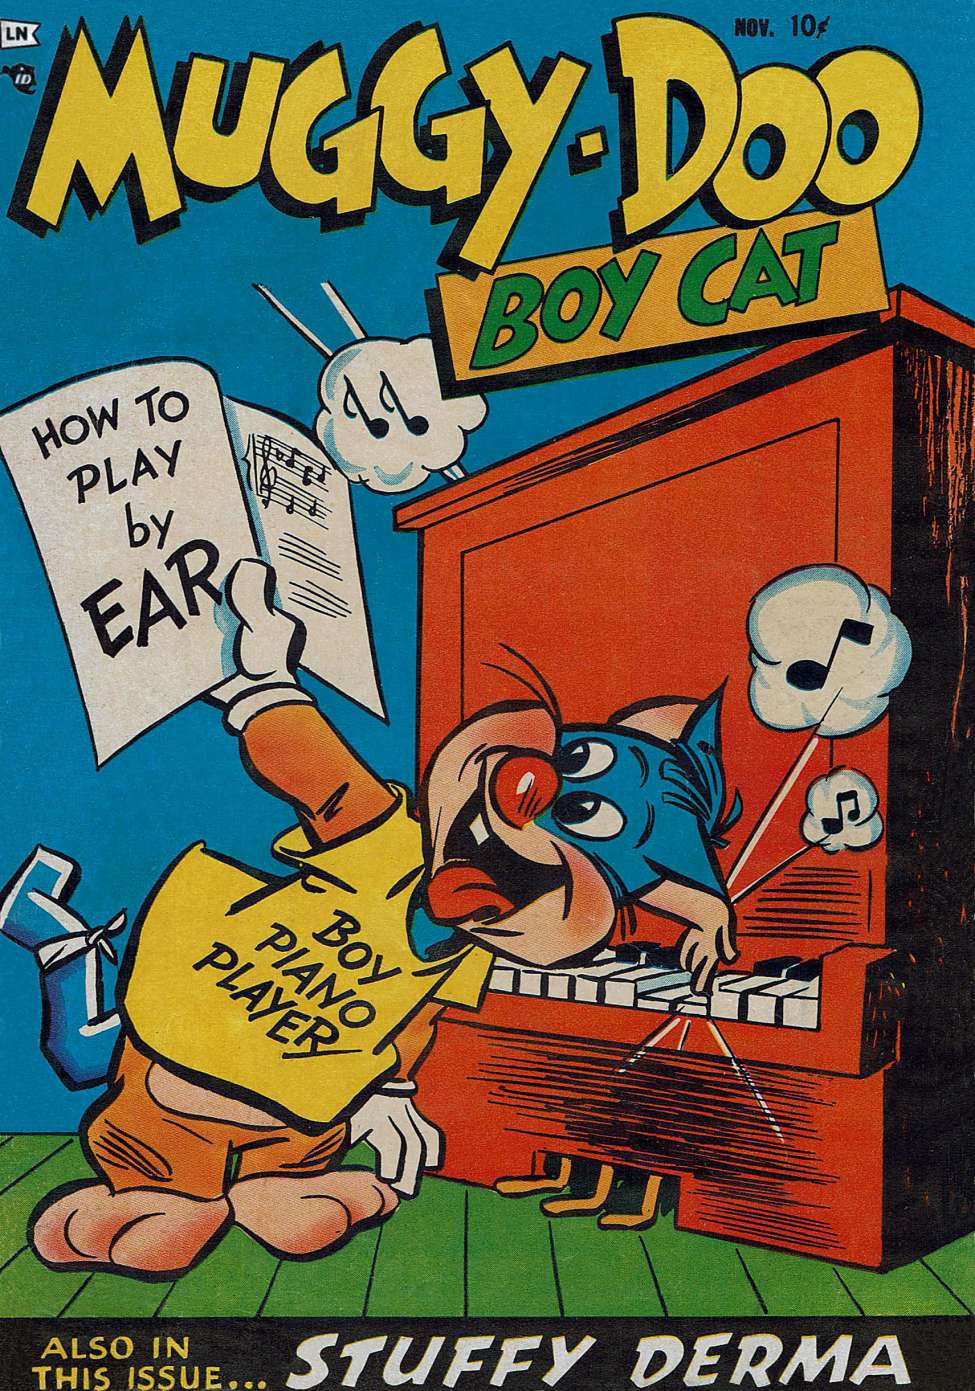 Book Cover For Muggy-Doo Boy Cat 3